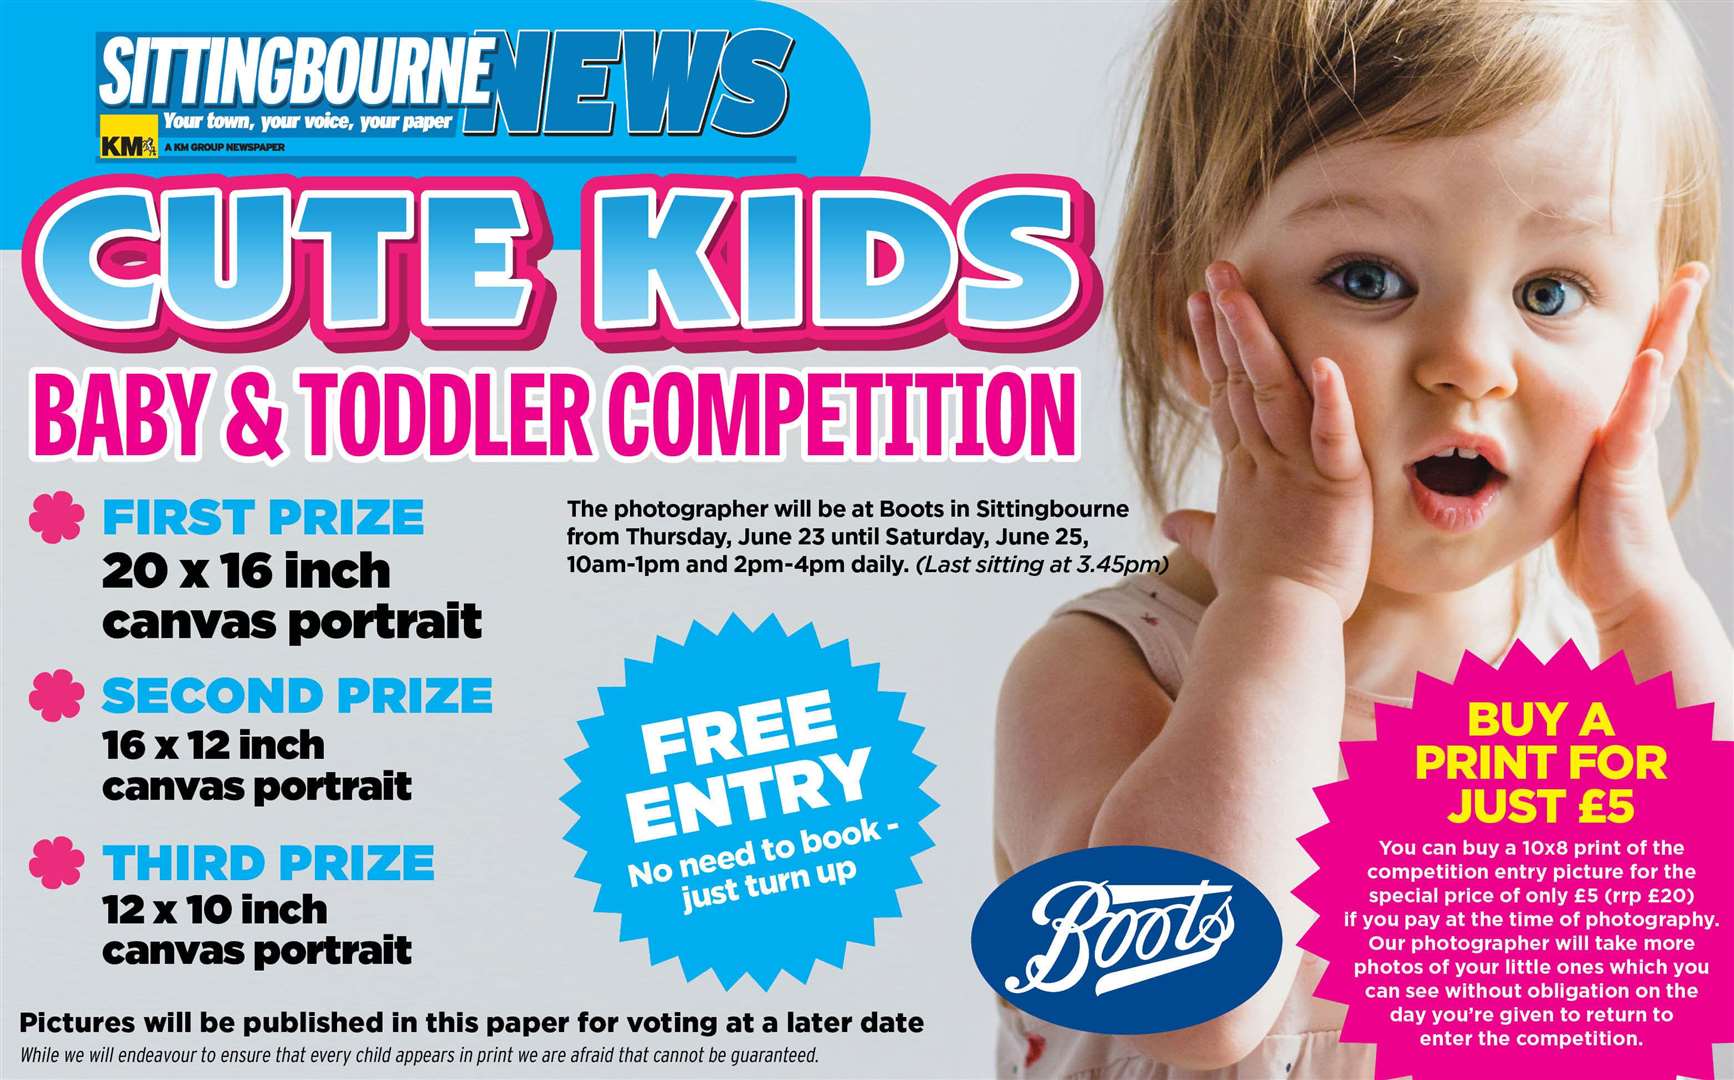 Cute Kids competition in Sittingbourne will be running from June 23-25